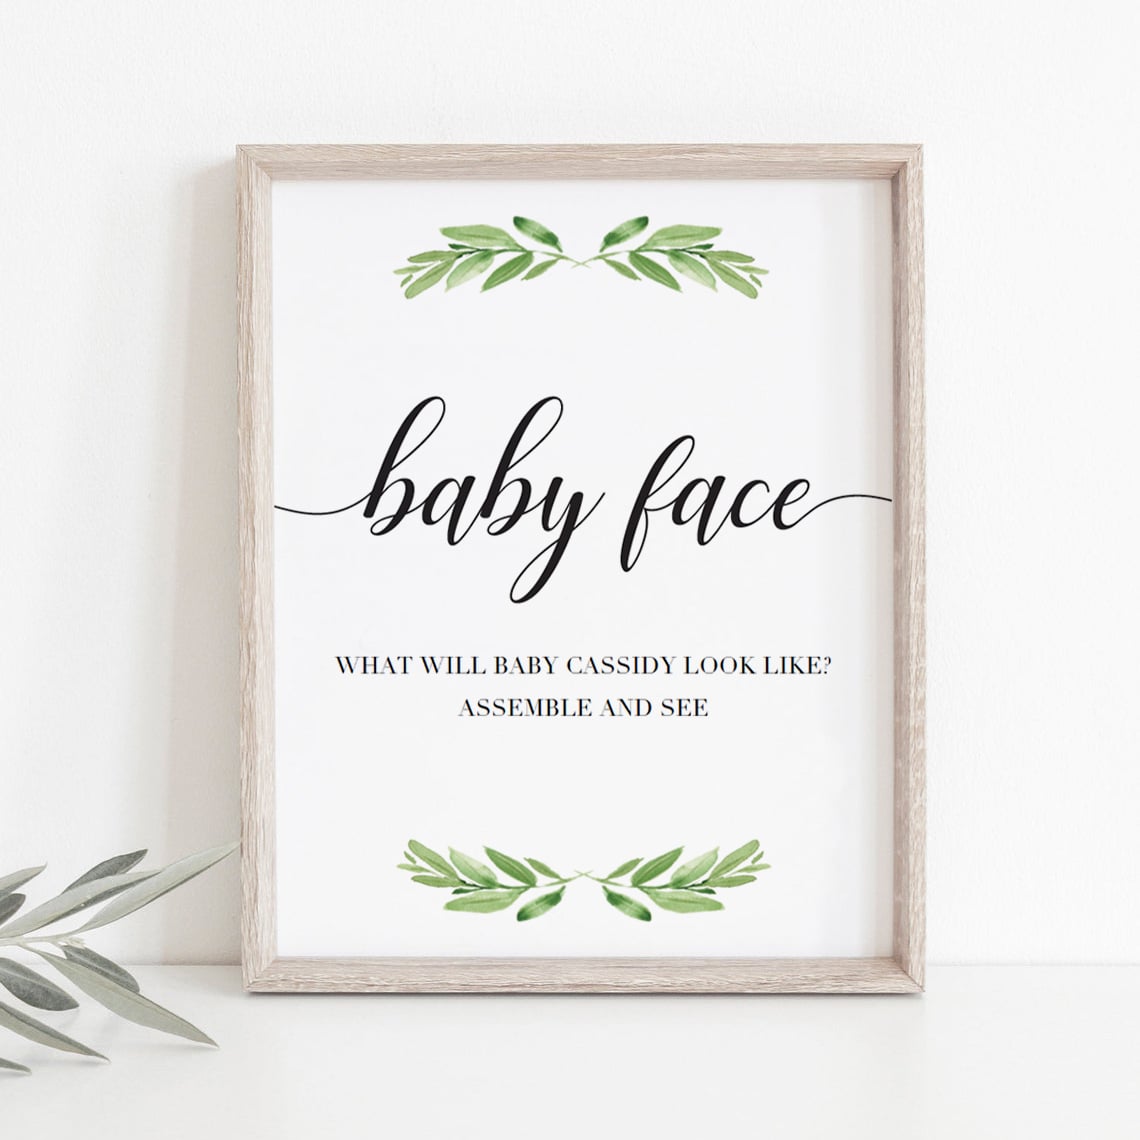 Editable baby shower decor for green baby shower by LittleSizzle